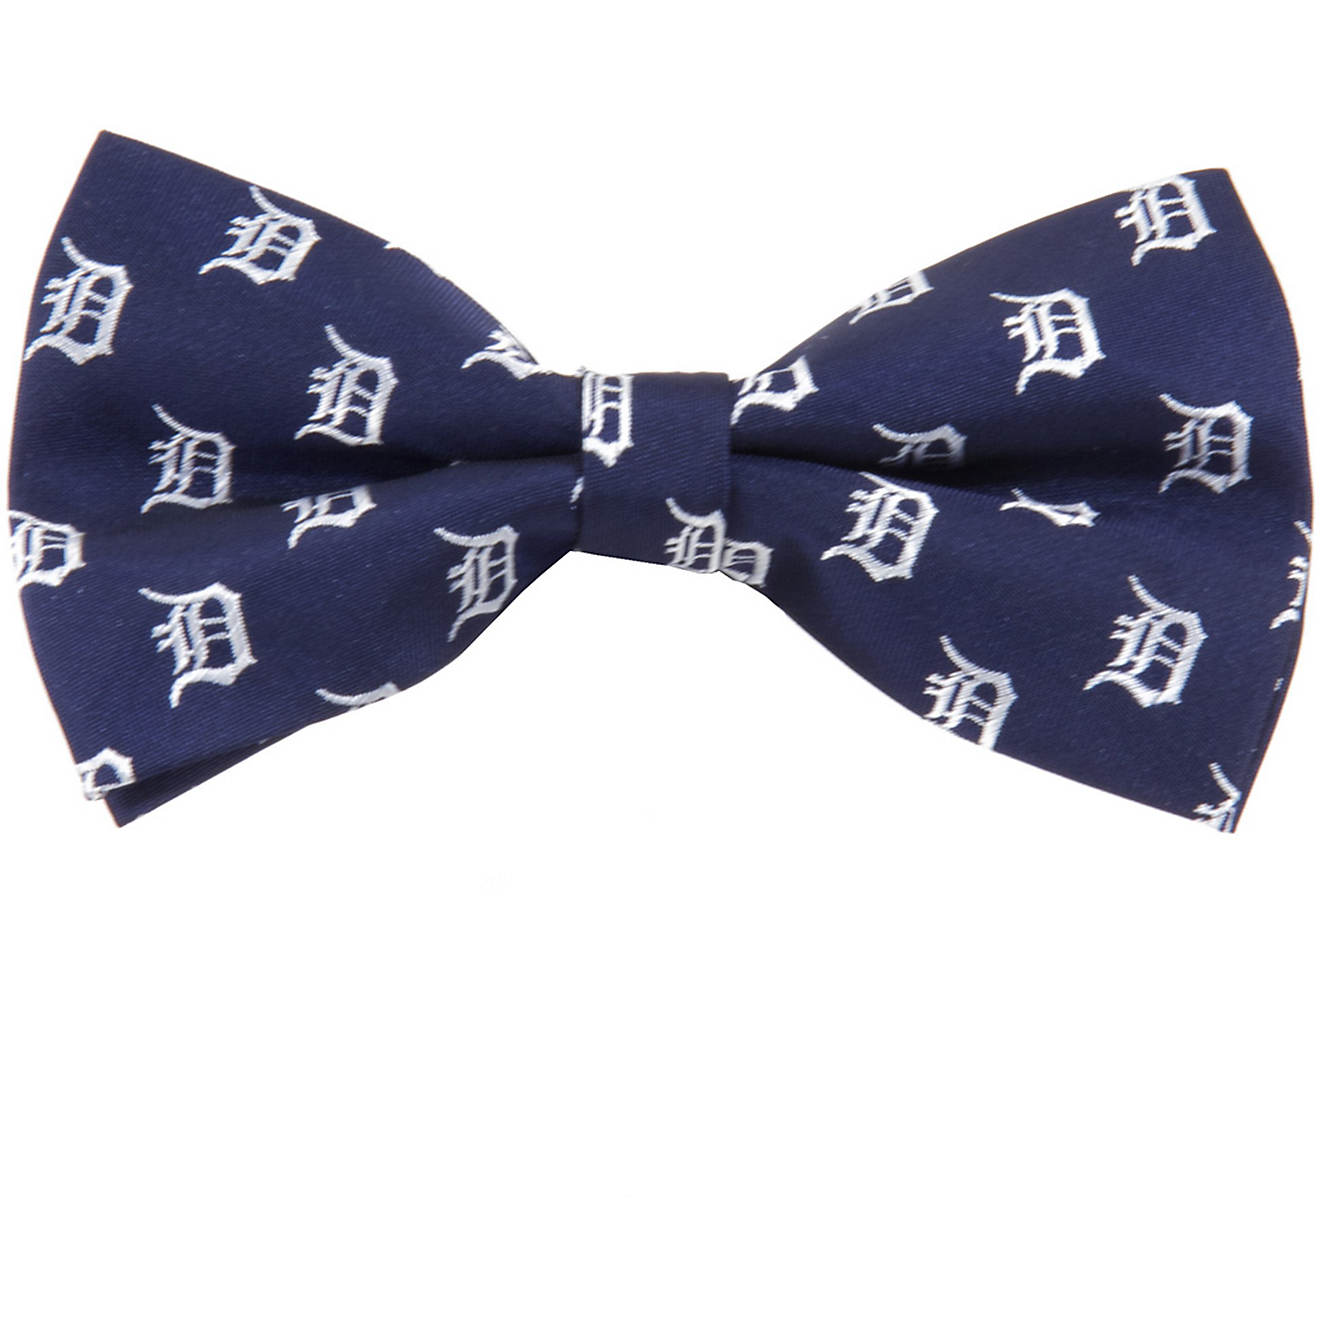 Detroit Tigers 100% Woven Polyester Baseball Tie 